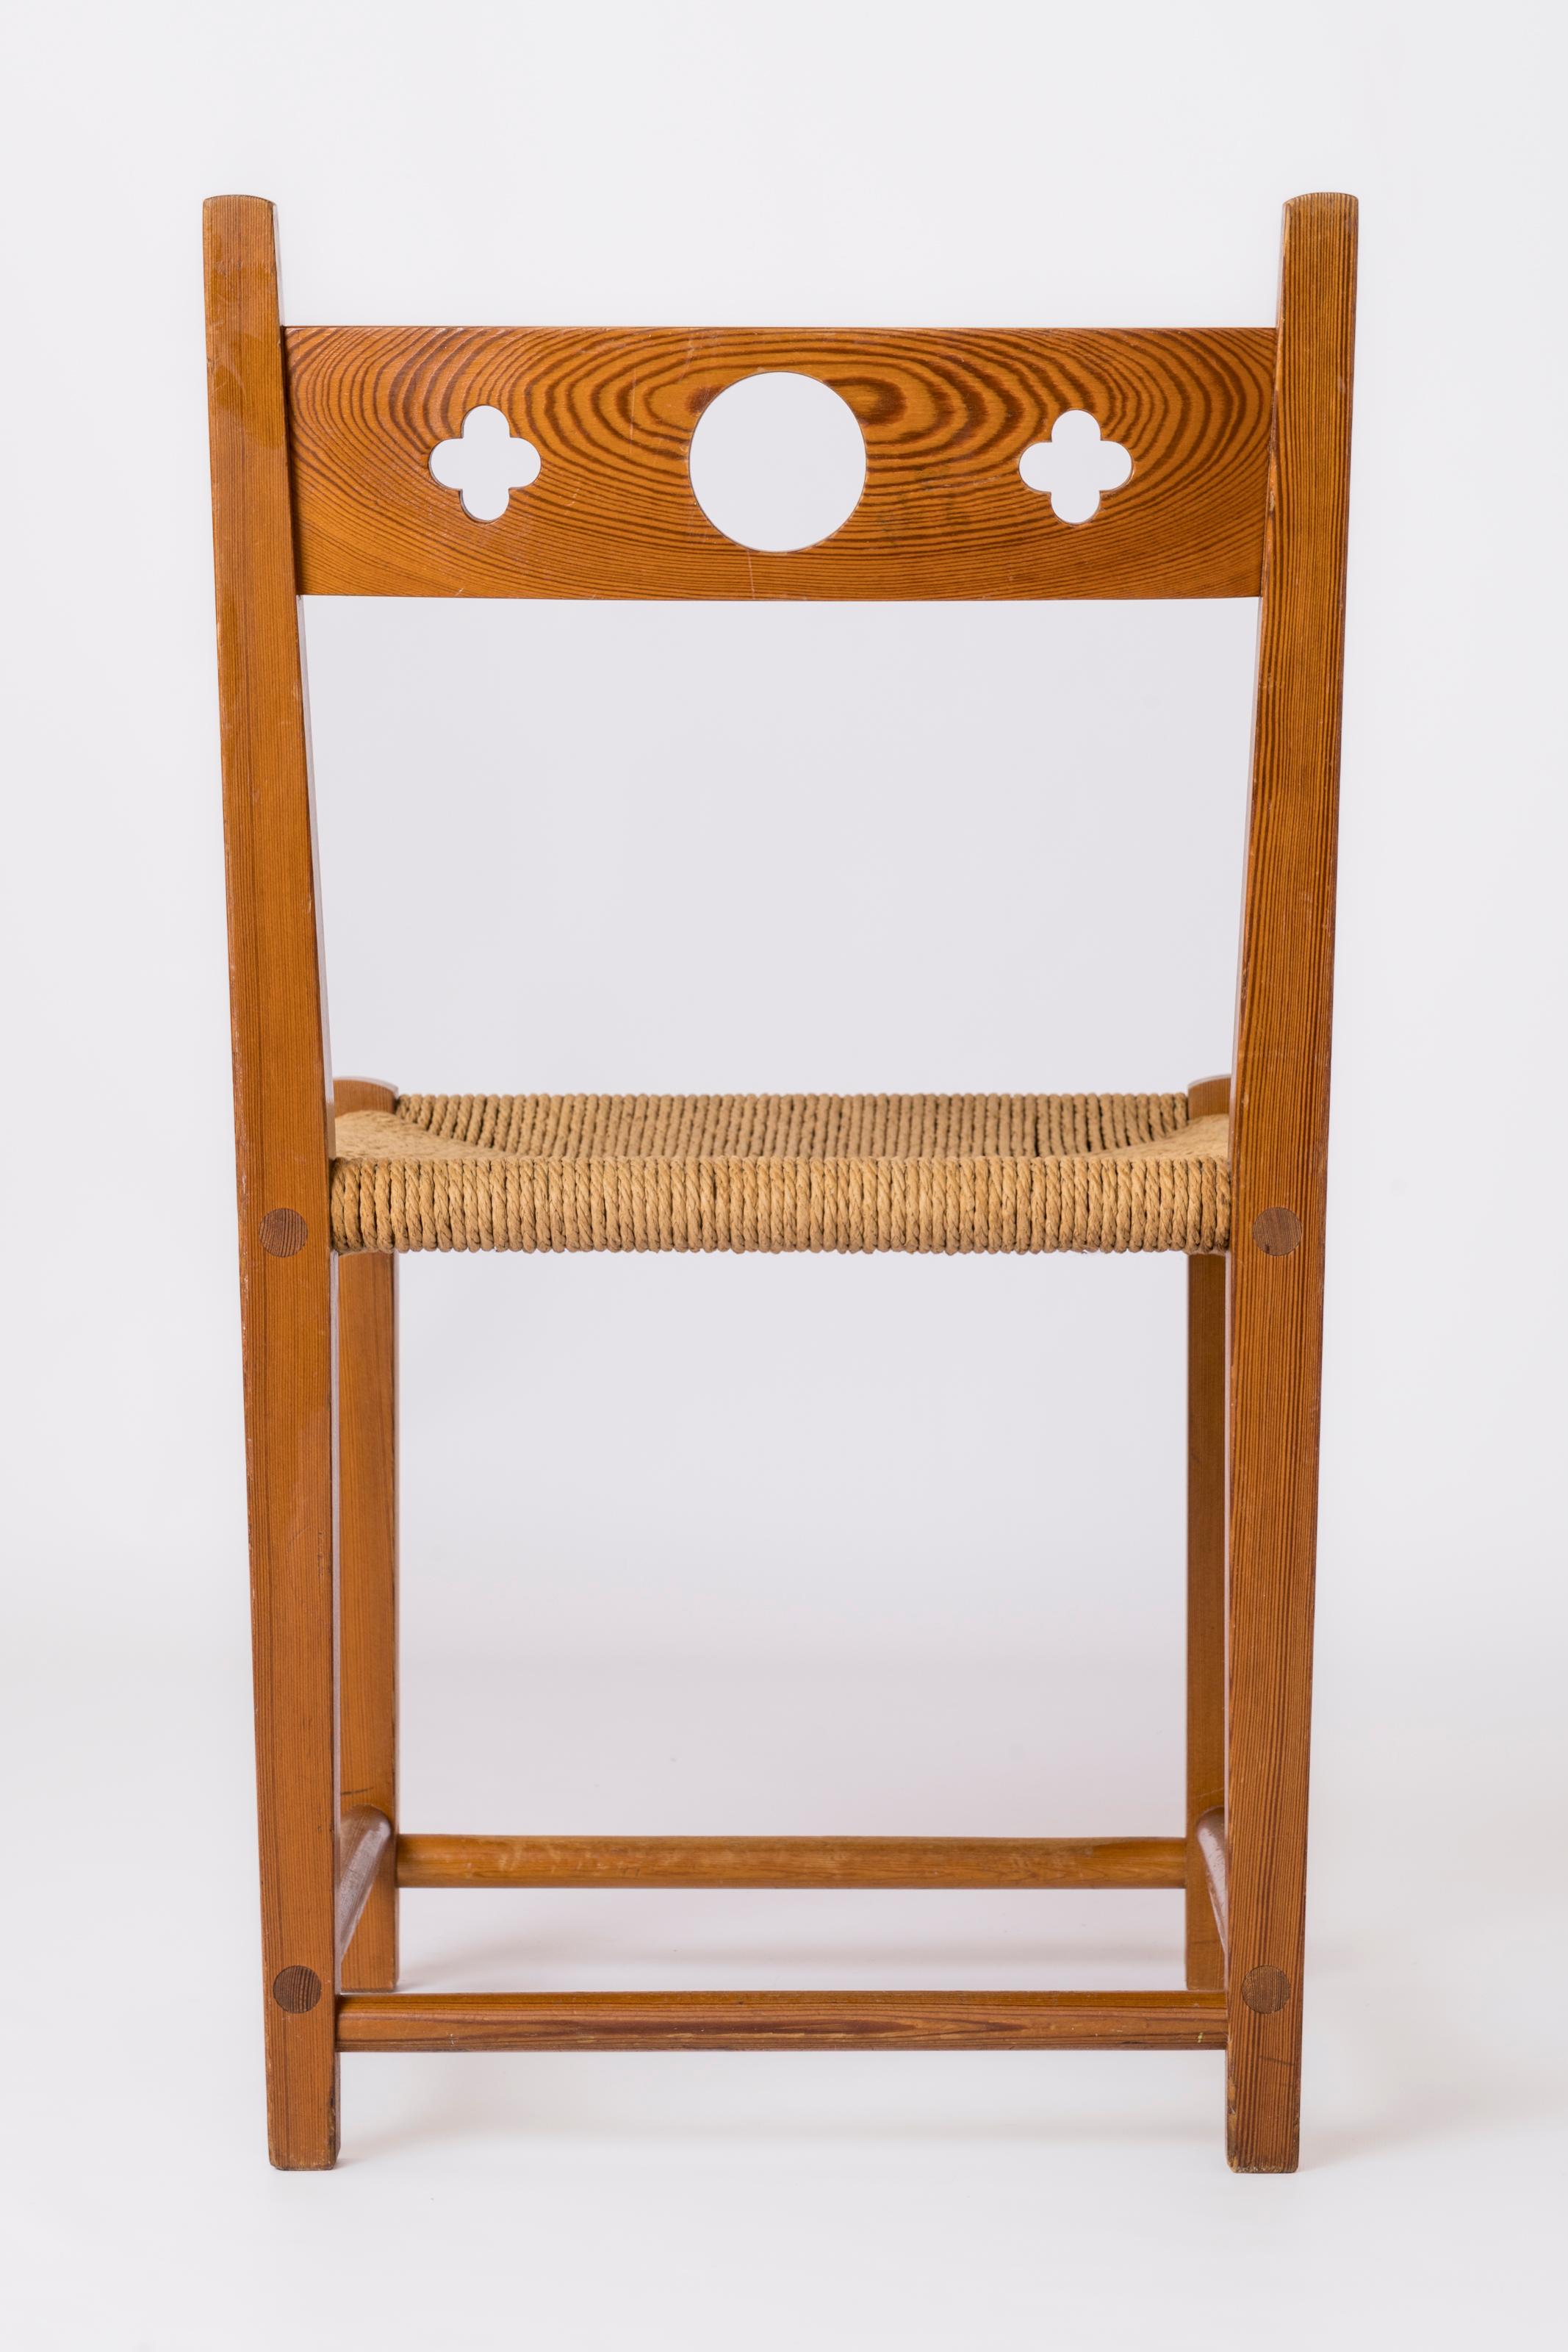 A graphic solid pinewood and rush single chair in the style of Marklund. Interesting carving details in the backrest. Very beautiful assembly details without nails or screws.
Sturdy. In overall fair vintage condition. Minor misses and